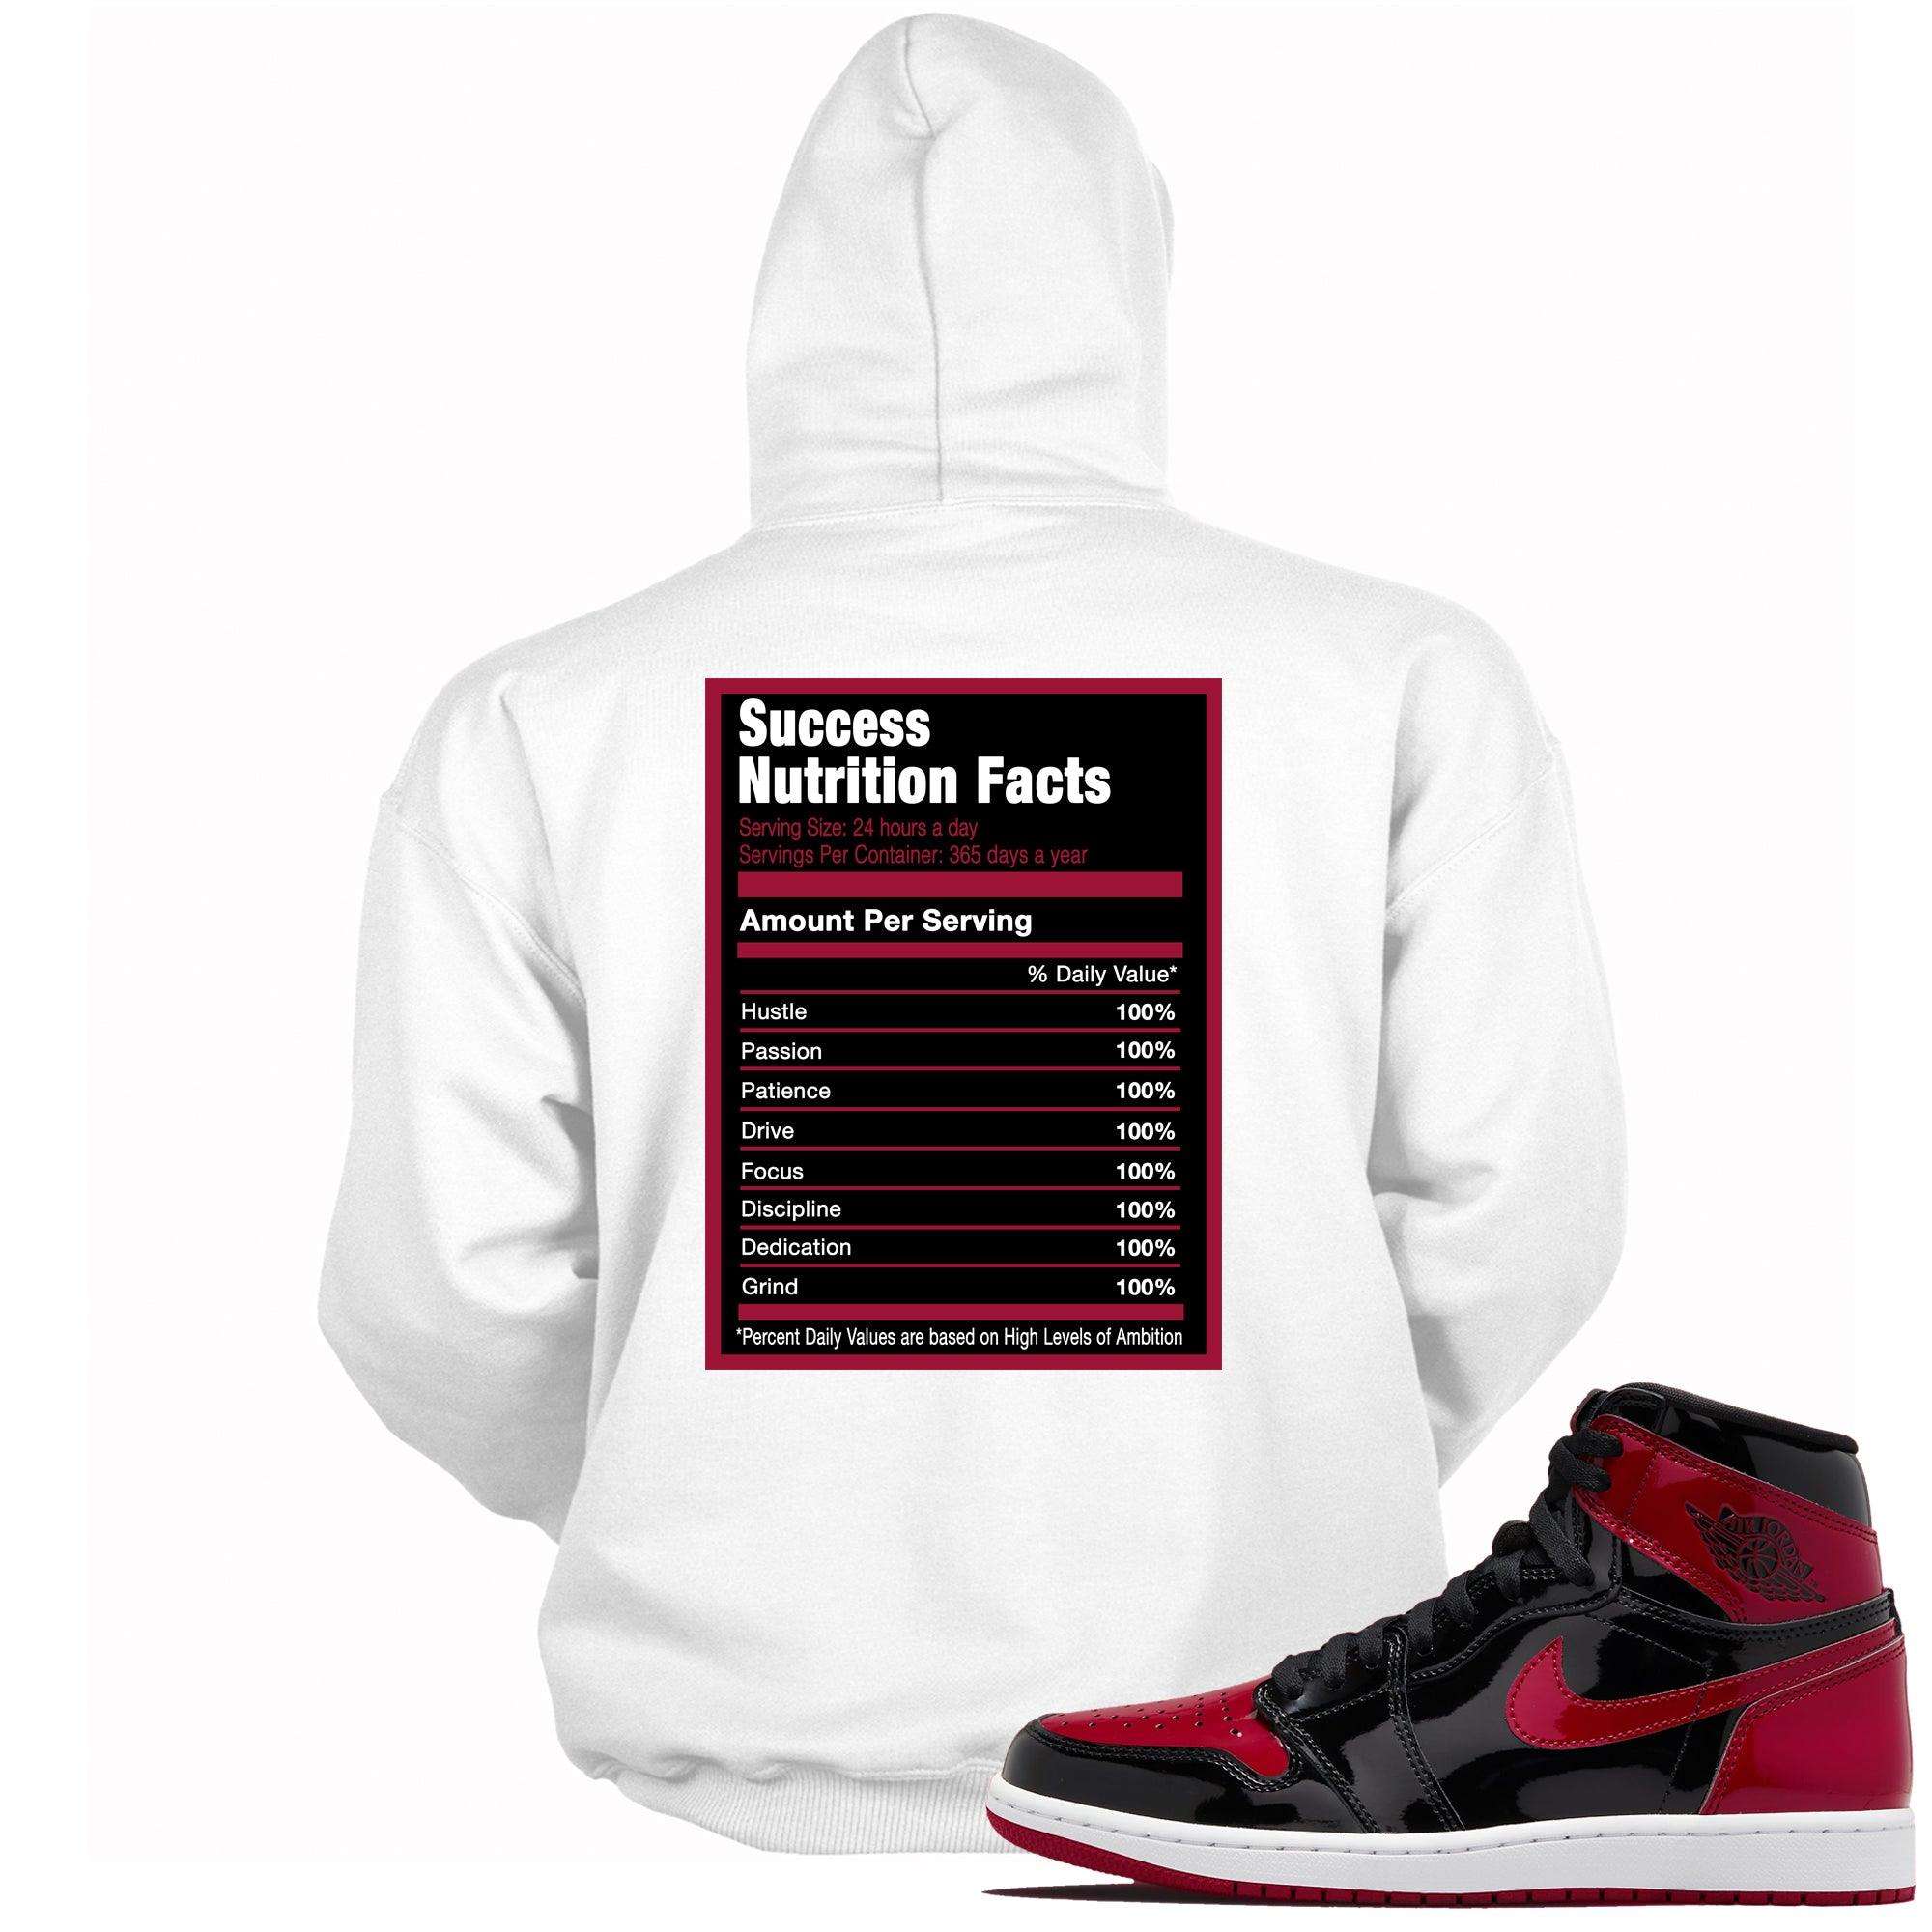 Success Nutrition Facts Sneaker Sweatshirt AJ 1 Patent Leather Bred Air photo